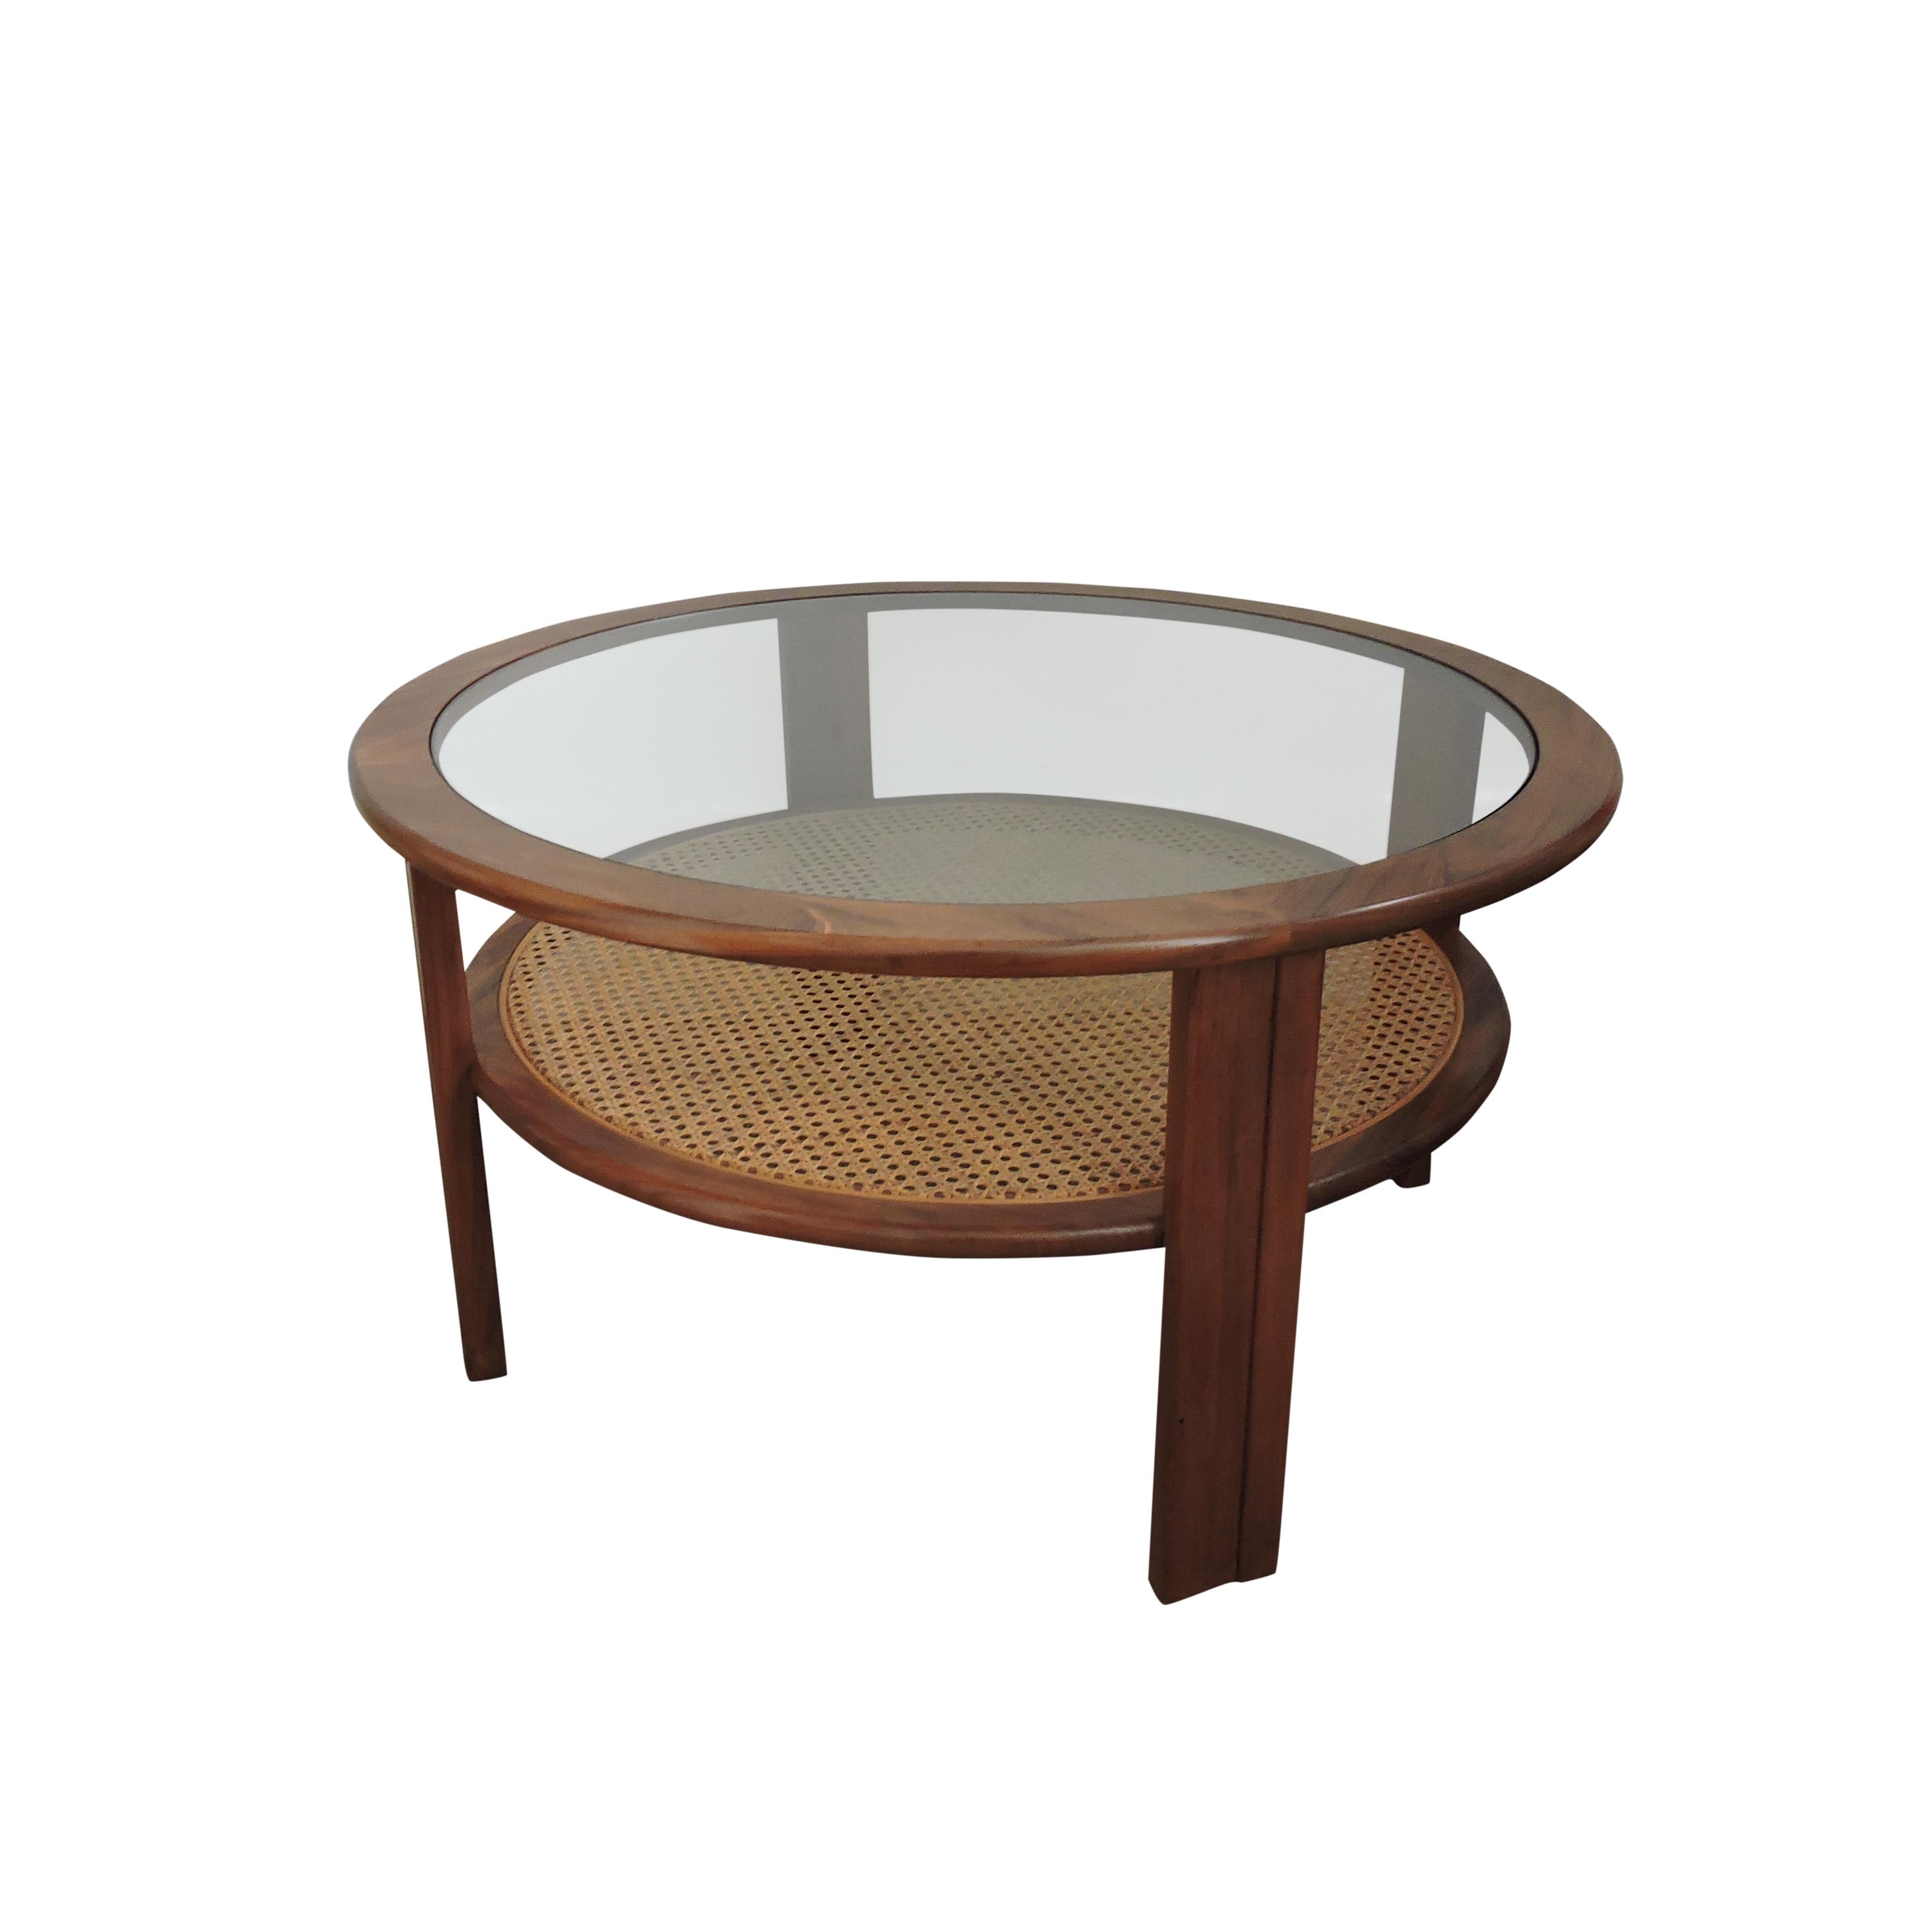 A circular glass topped teak coffee table by G-Plan with a lower cane shelf.